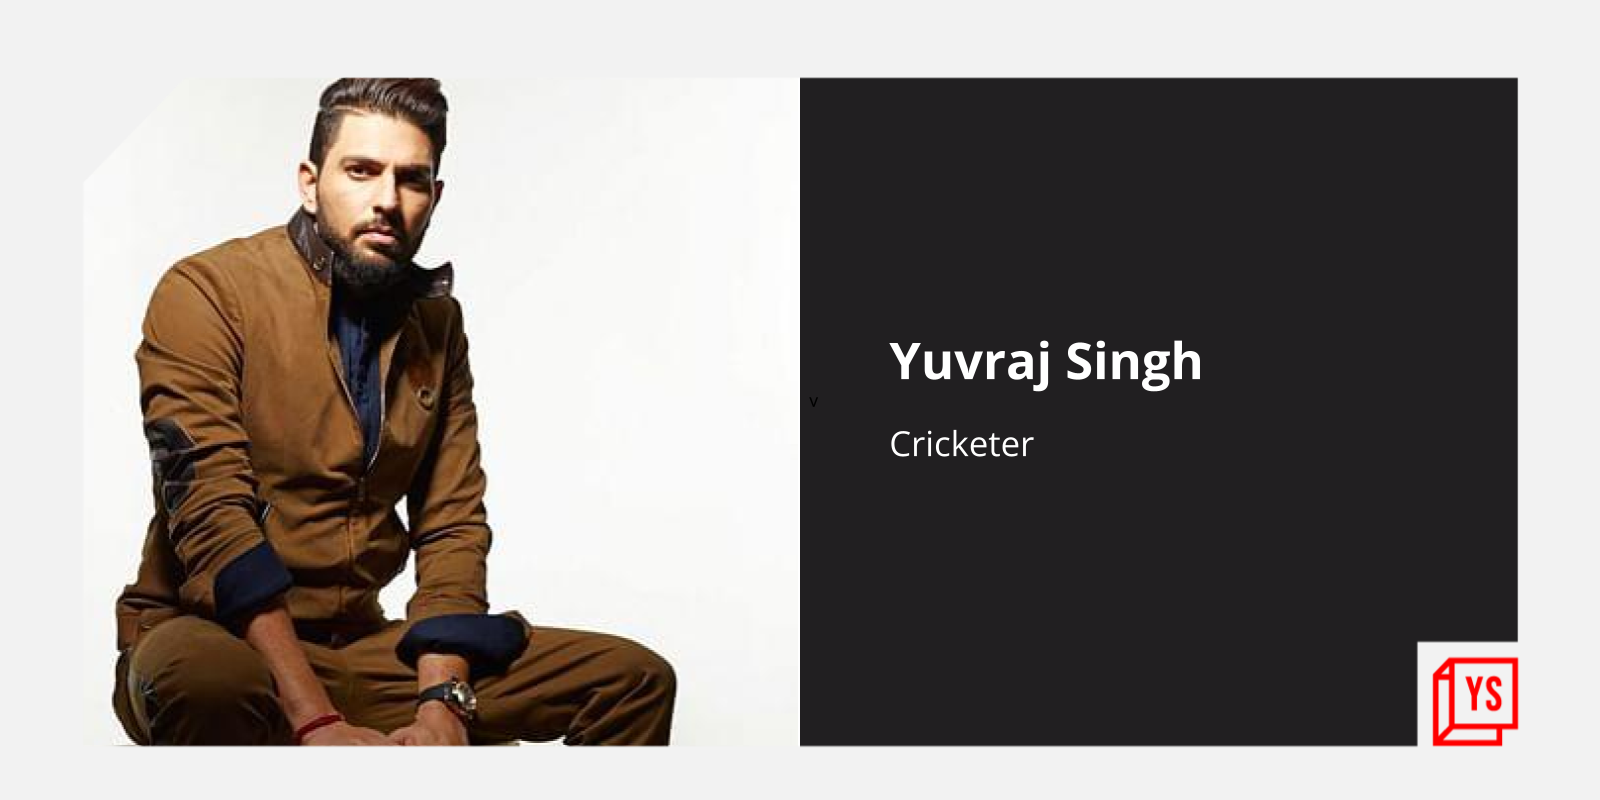 Cricketer Yuvraj Singh launches an NFT collection; his first century bat enters space
